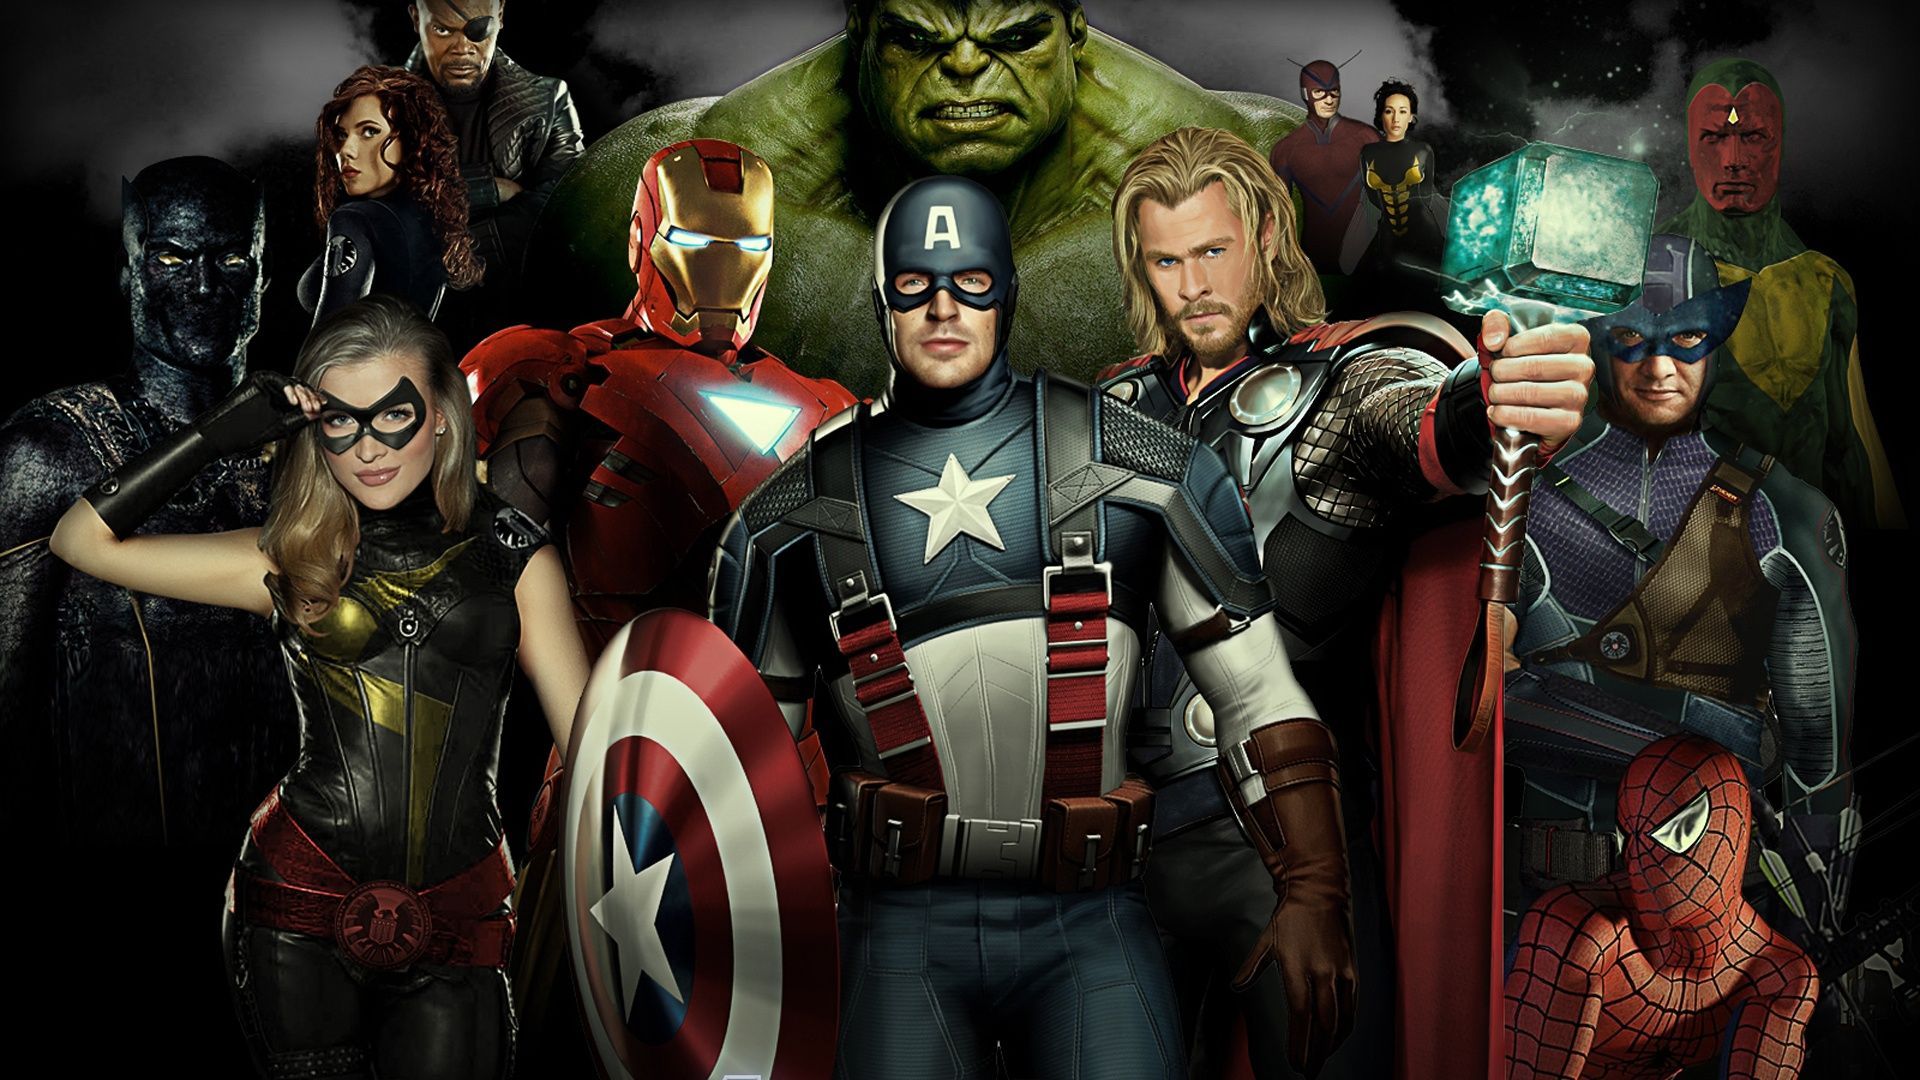 The Avengers 2012 movie HD Wallpaper | 1920x1080 resolution ...